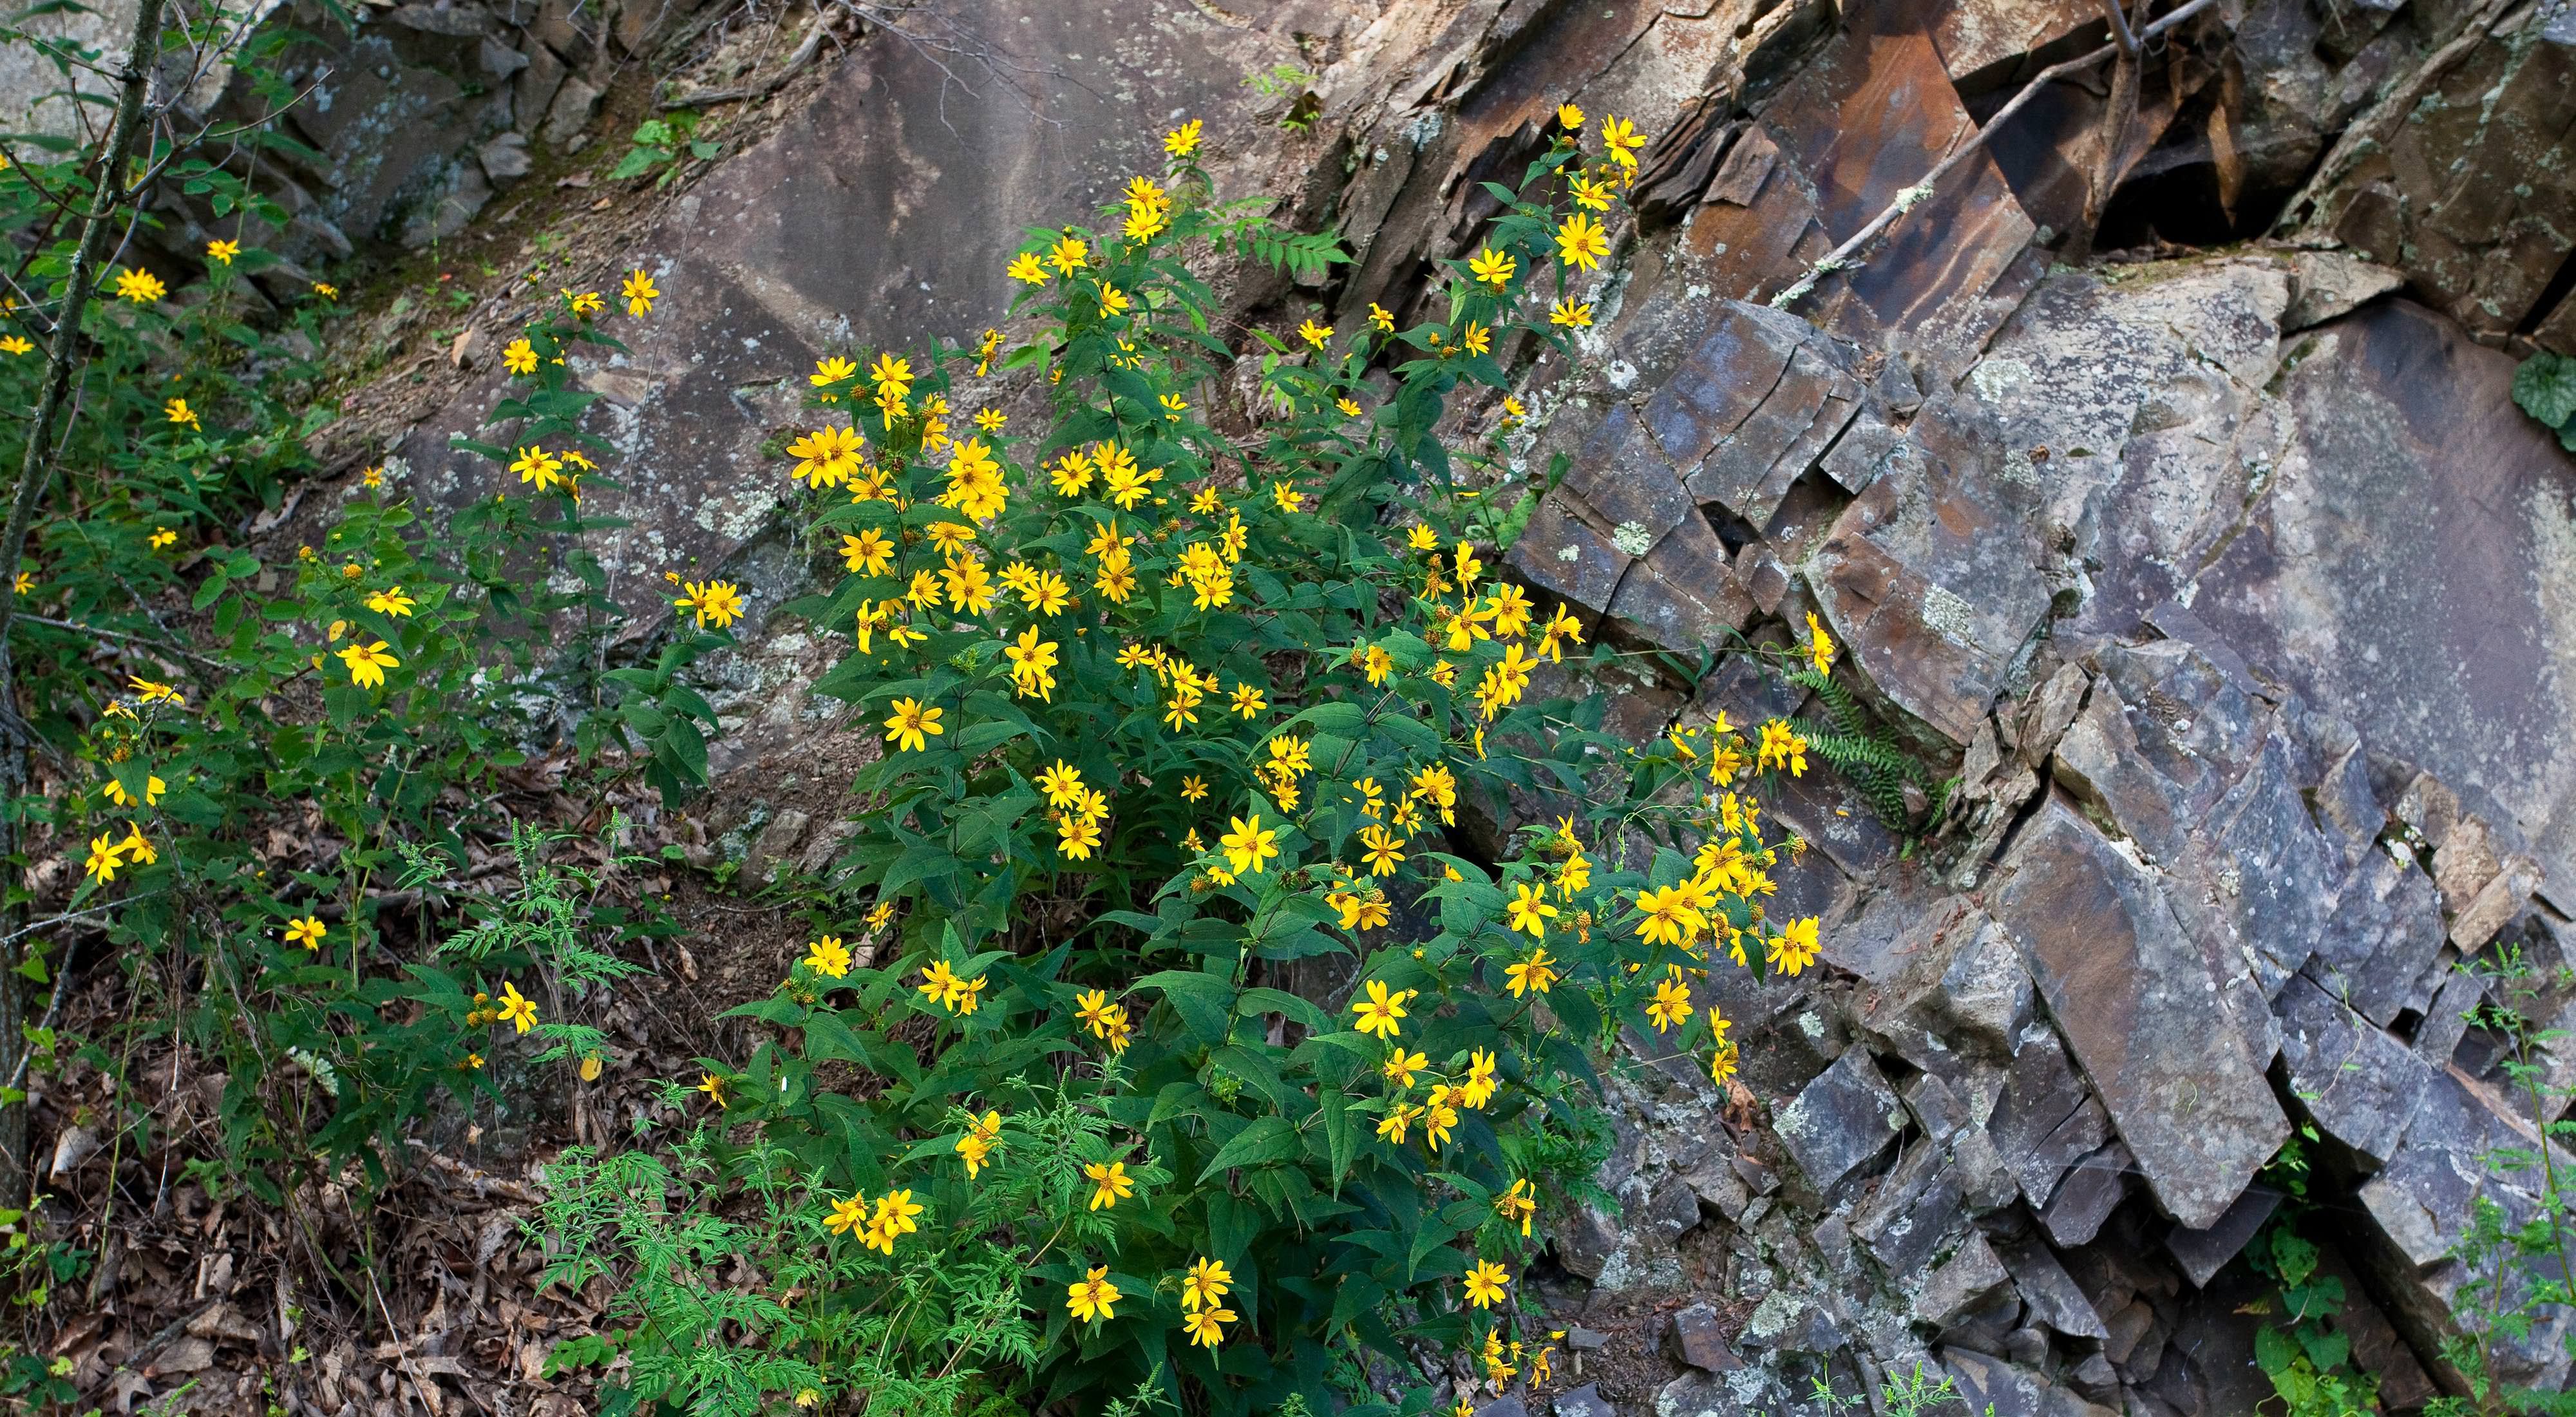 Small multi-petal yellow flowers grow out of clefts in a rock face.